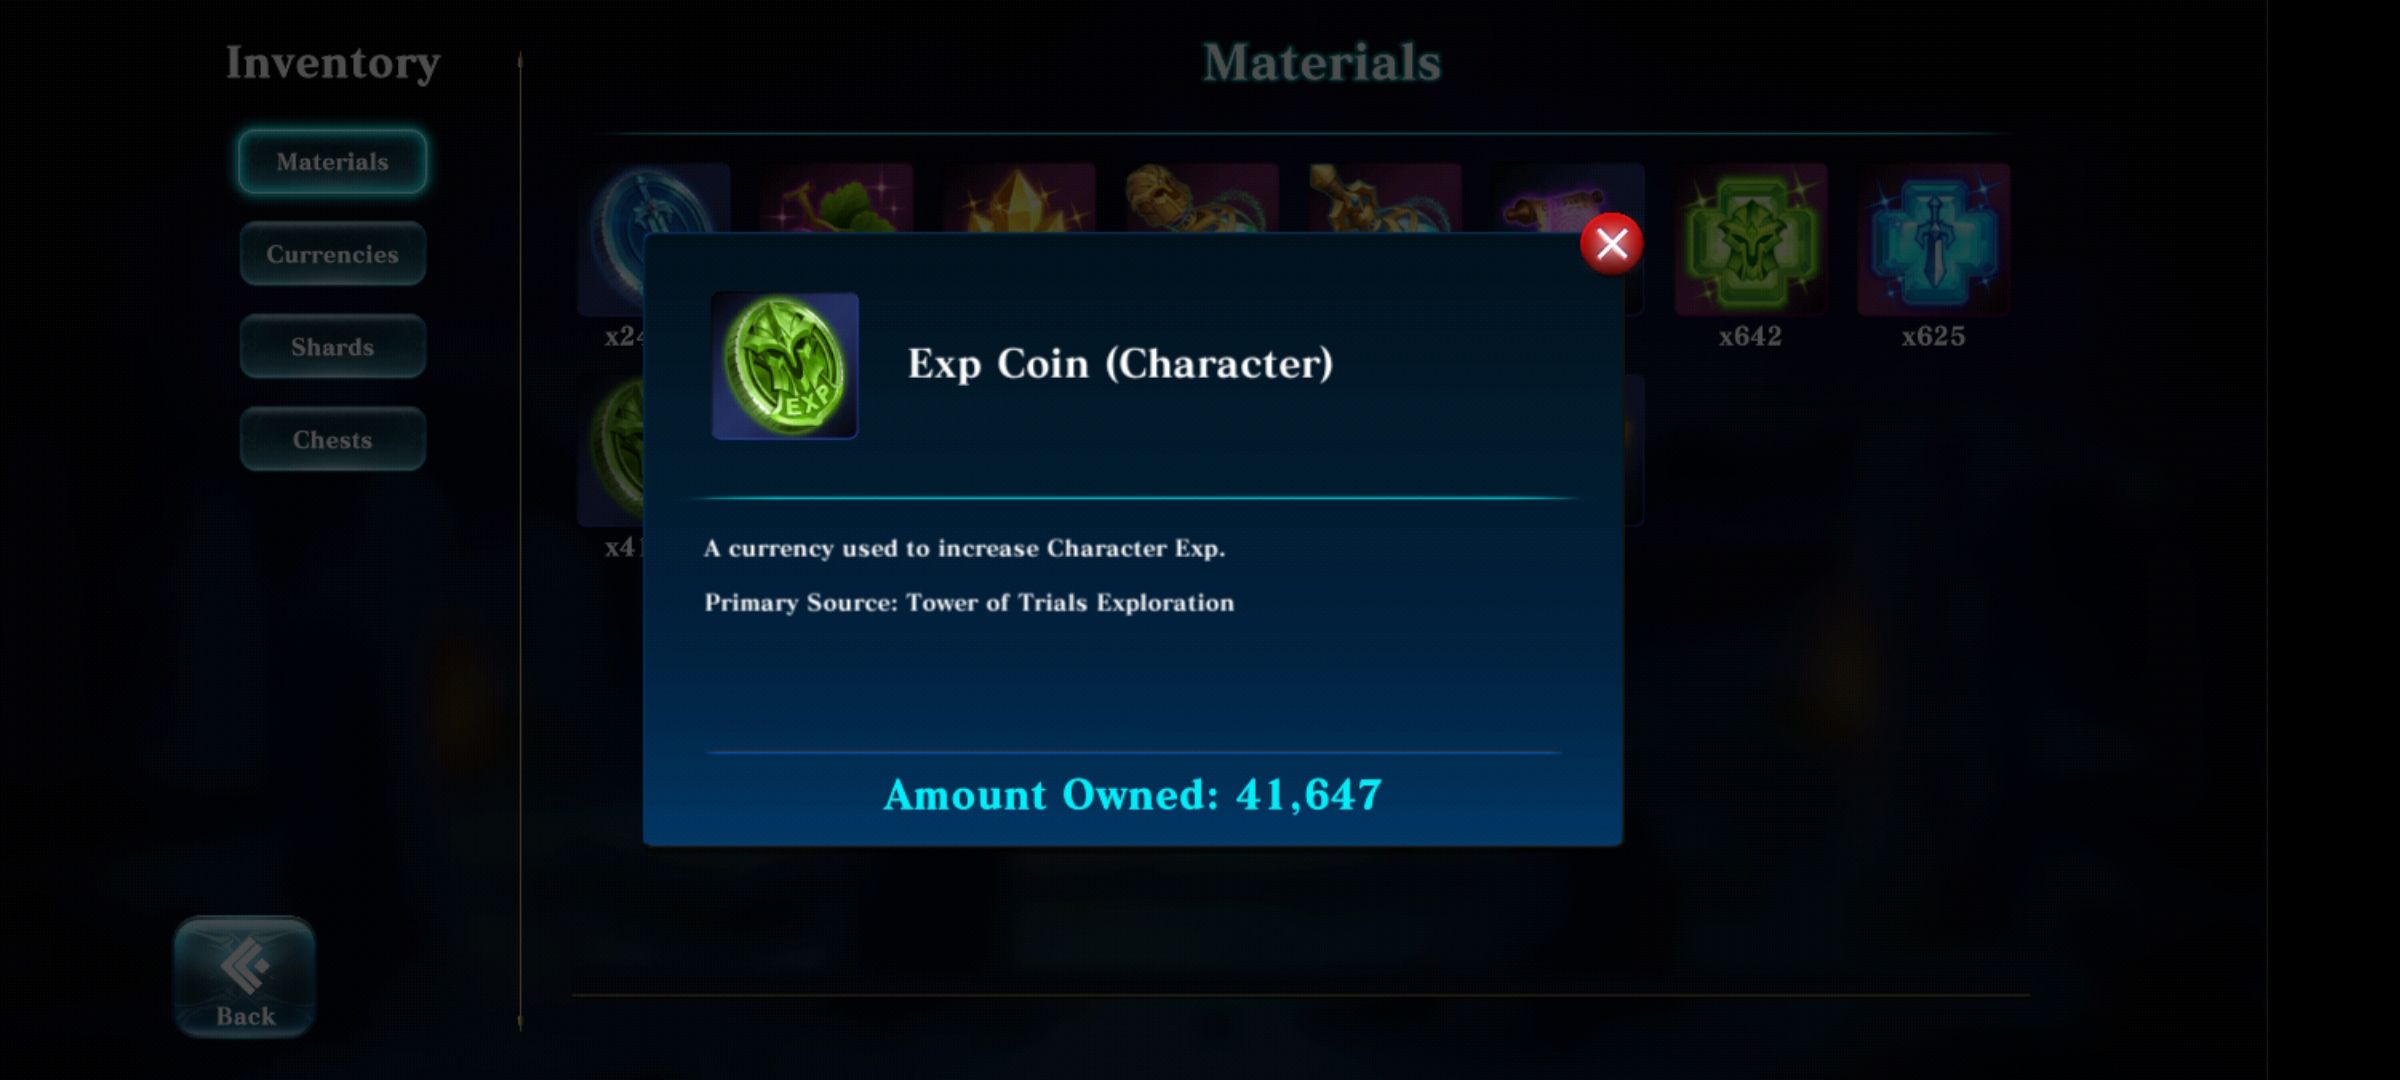 exp coin (character) description with the amount owned